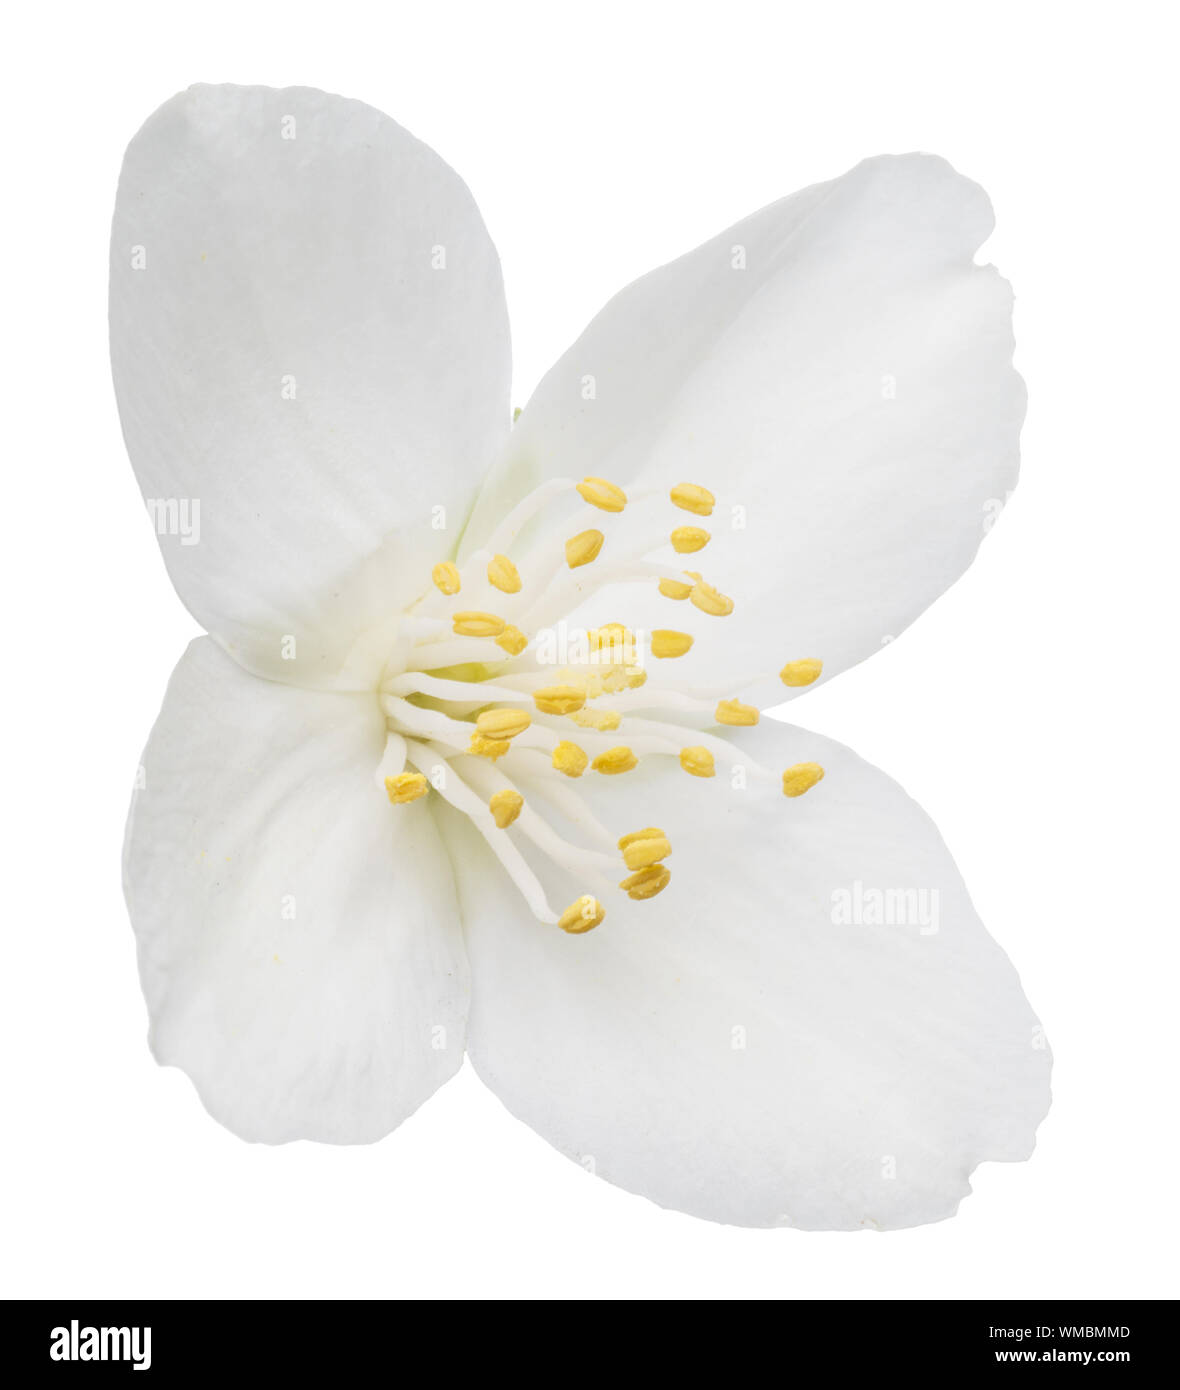 Tender jasmine flower on white background. File contains clipping path. Stock Photo